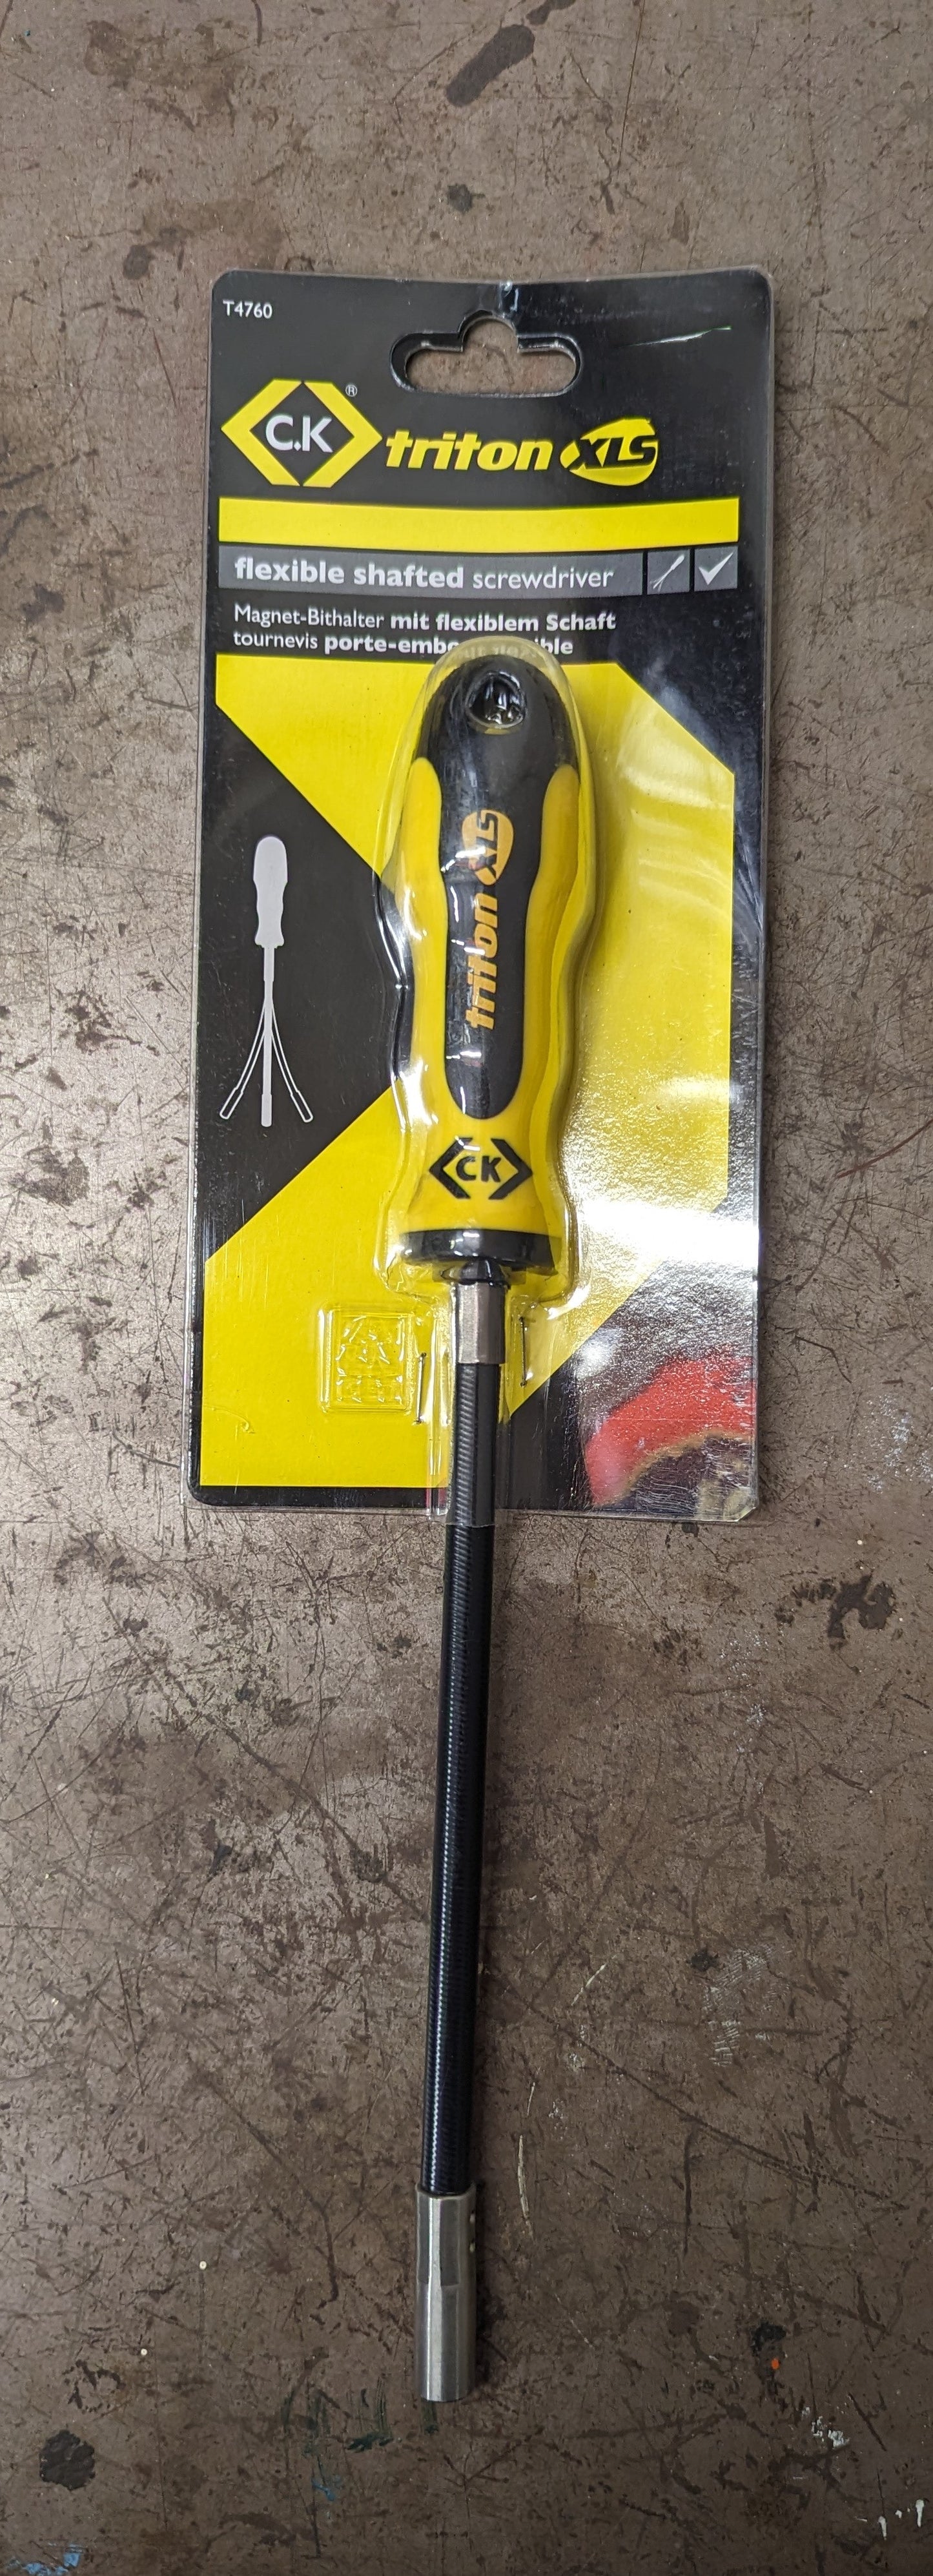 CK Flexible Shafted Screwdriver